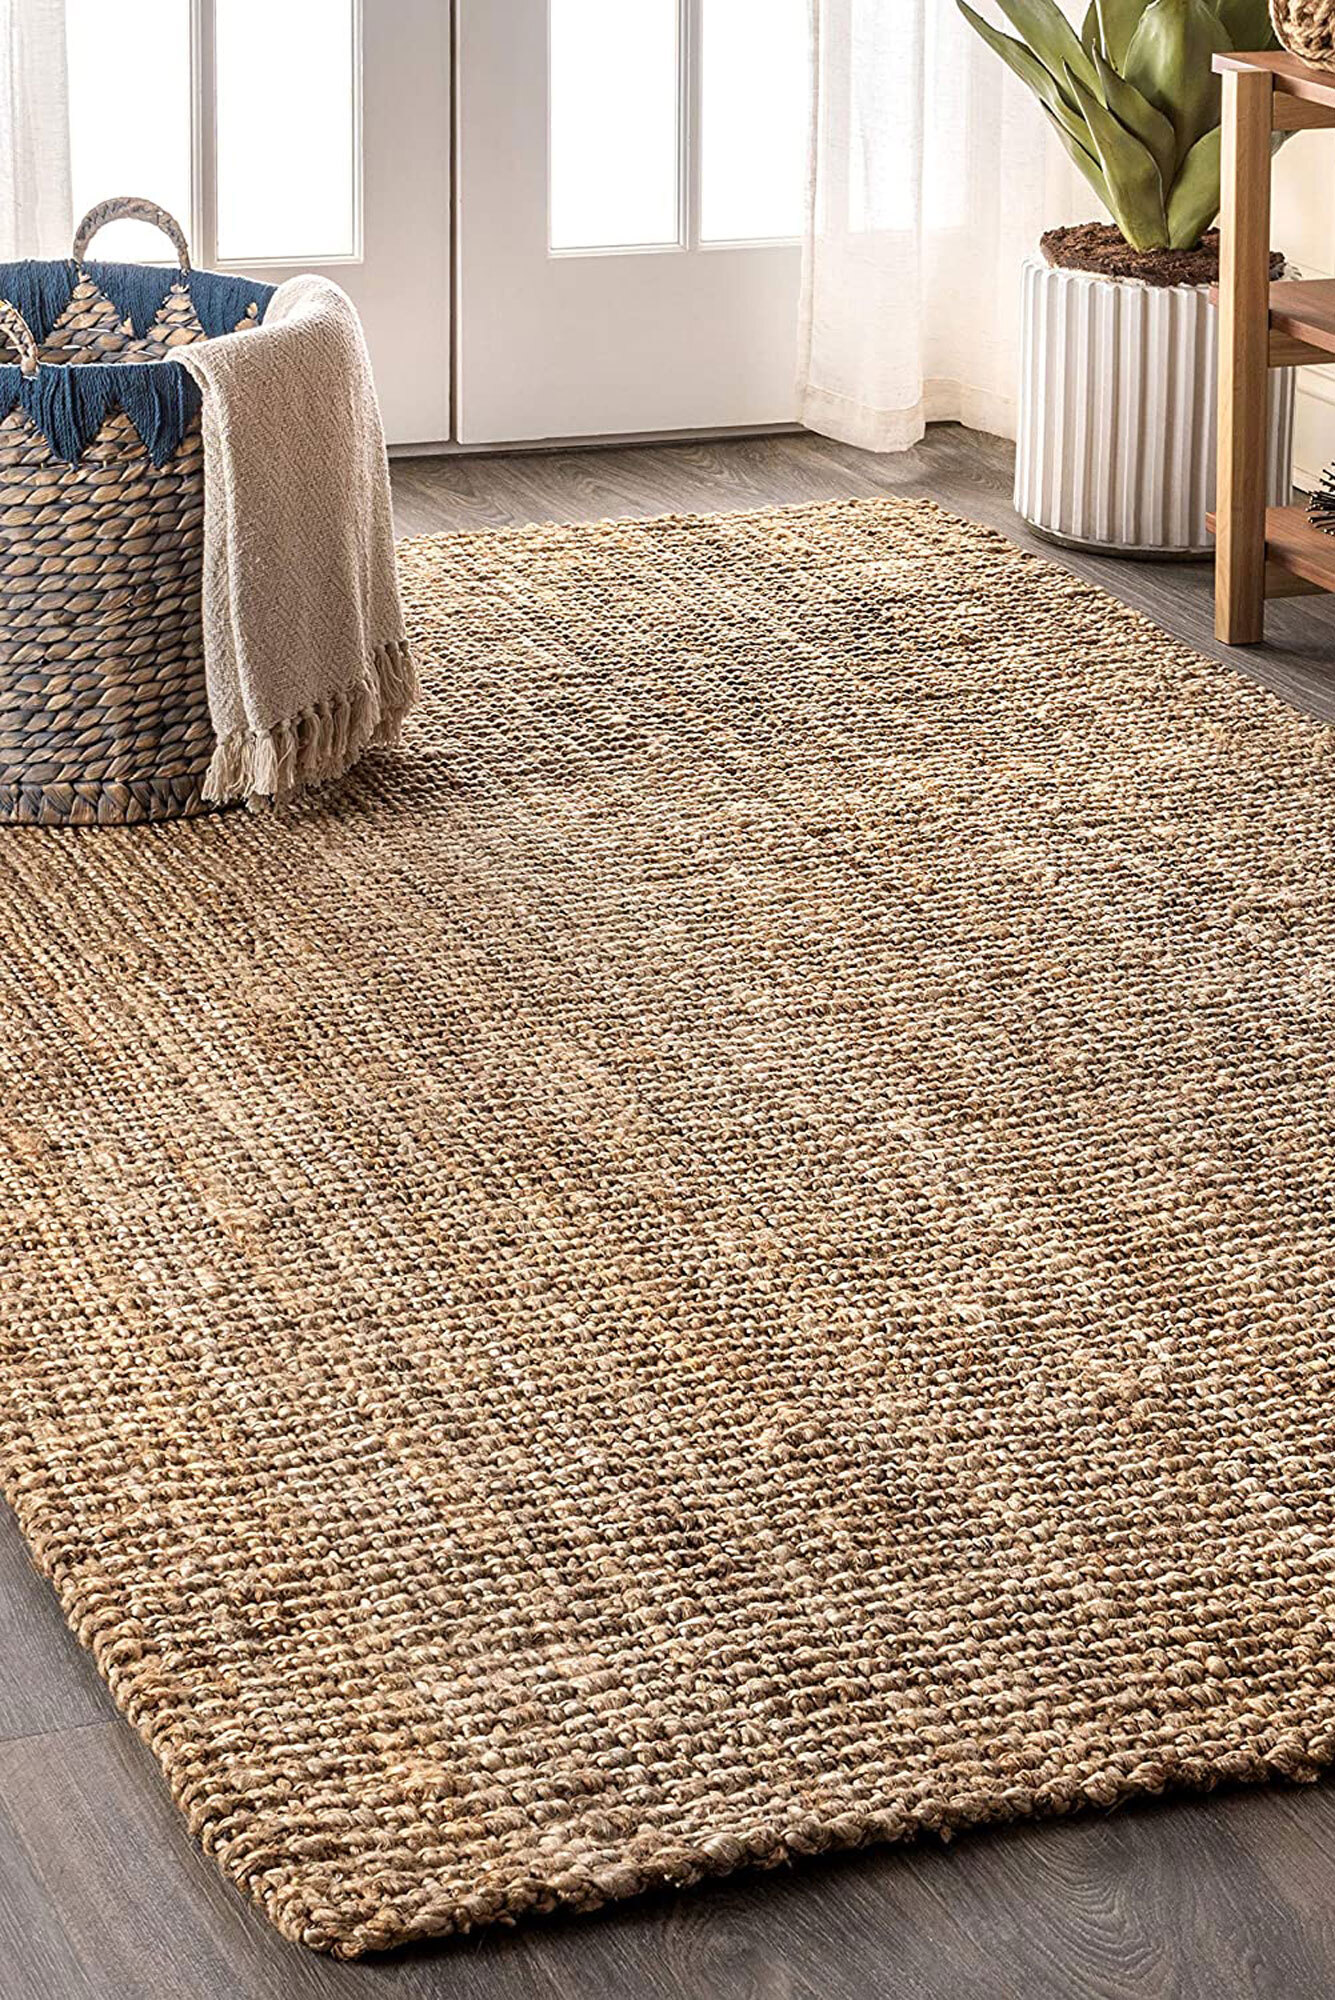 Johnny Jute Hand Woven Rug(Size 264 x 170cm)